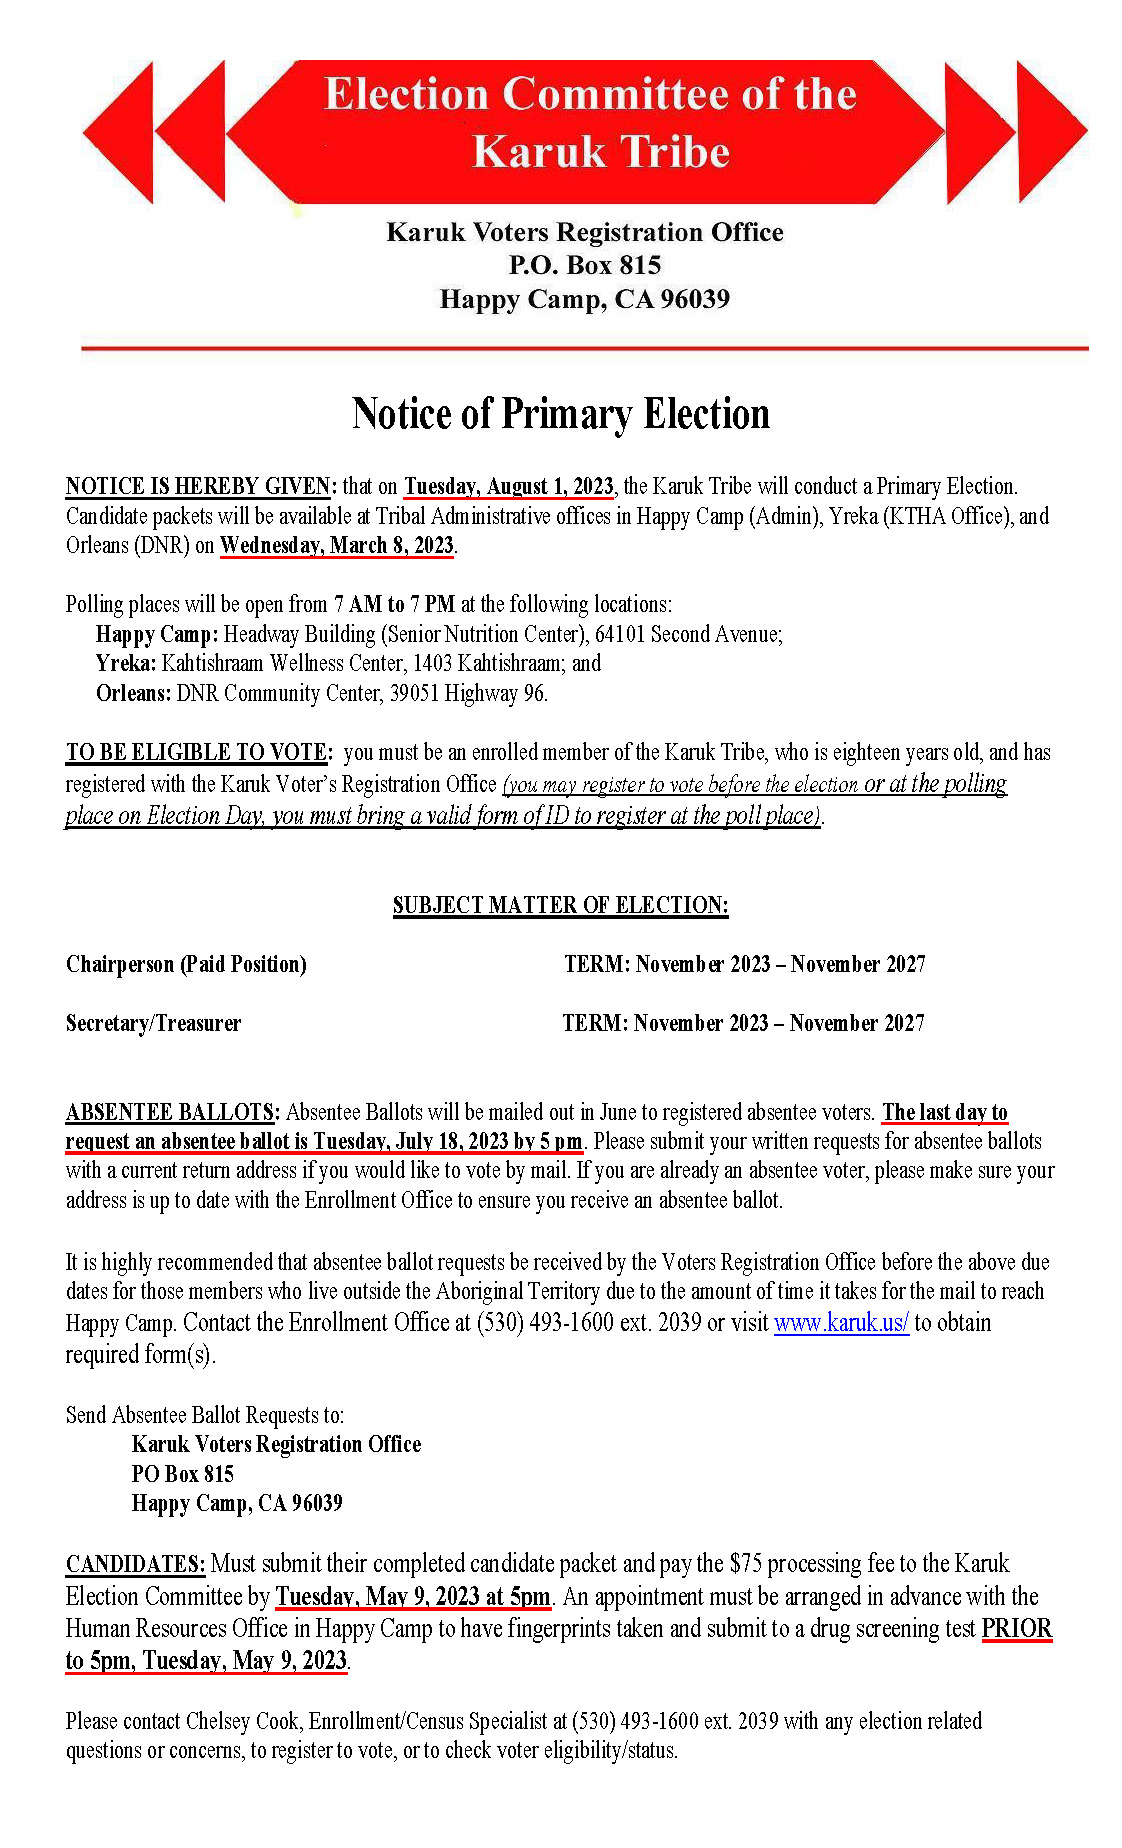 Notice of Primary Election 2023